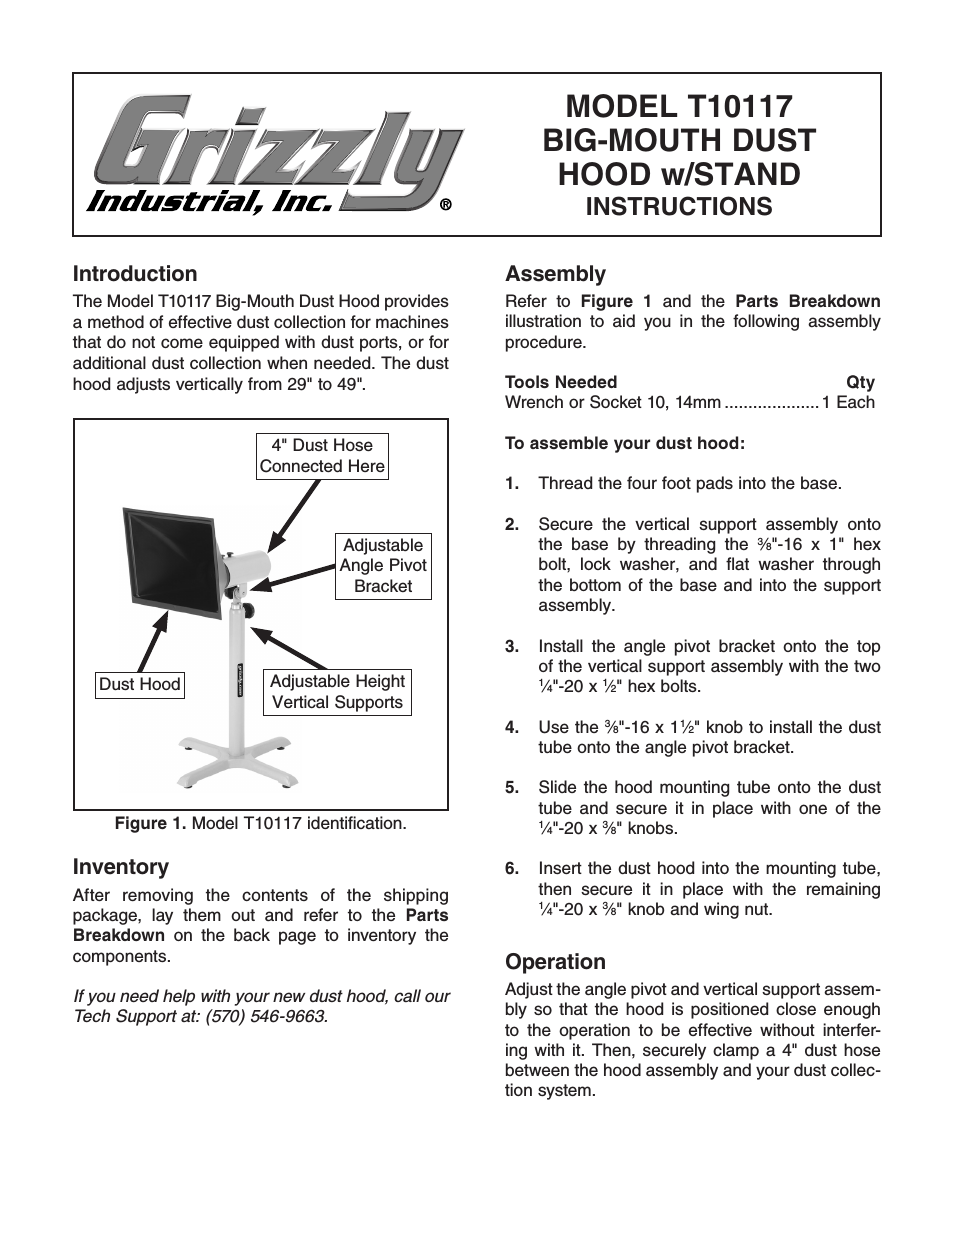 Big-Mouth Dust Hood T10117 (Page 1)